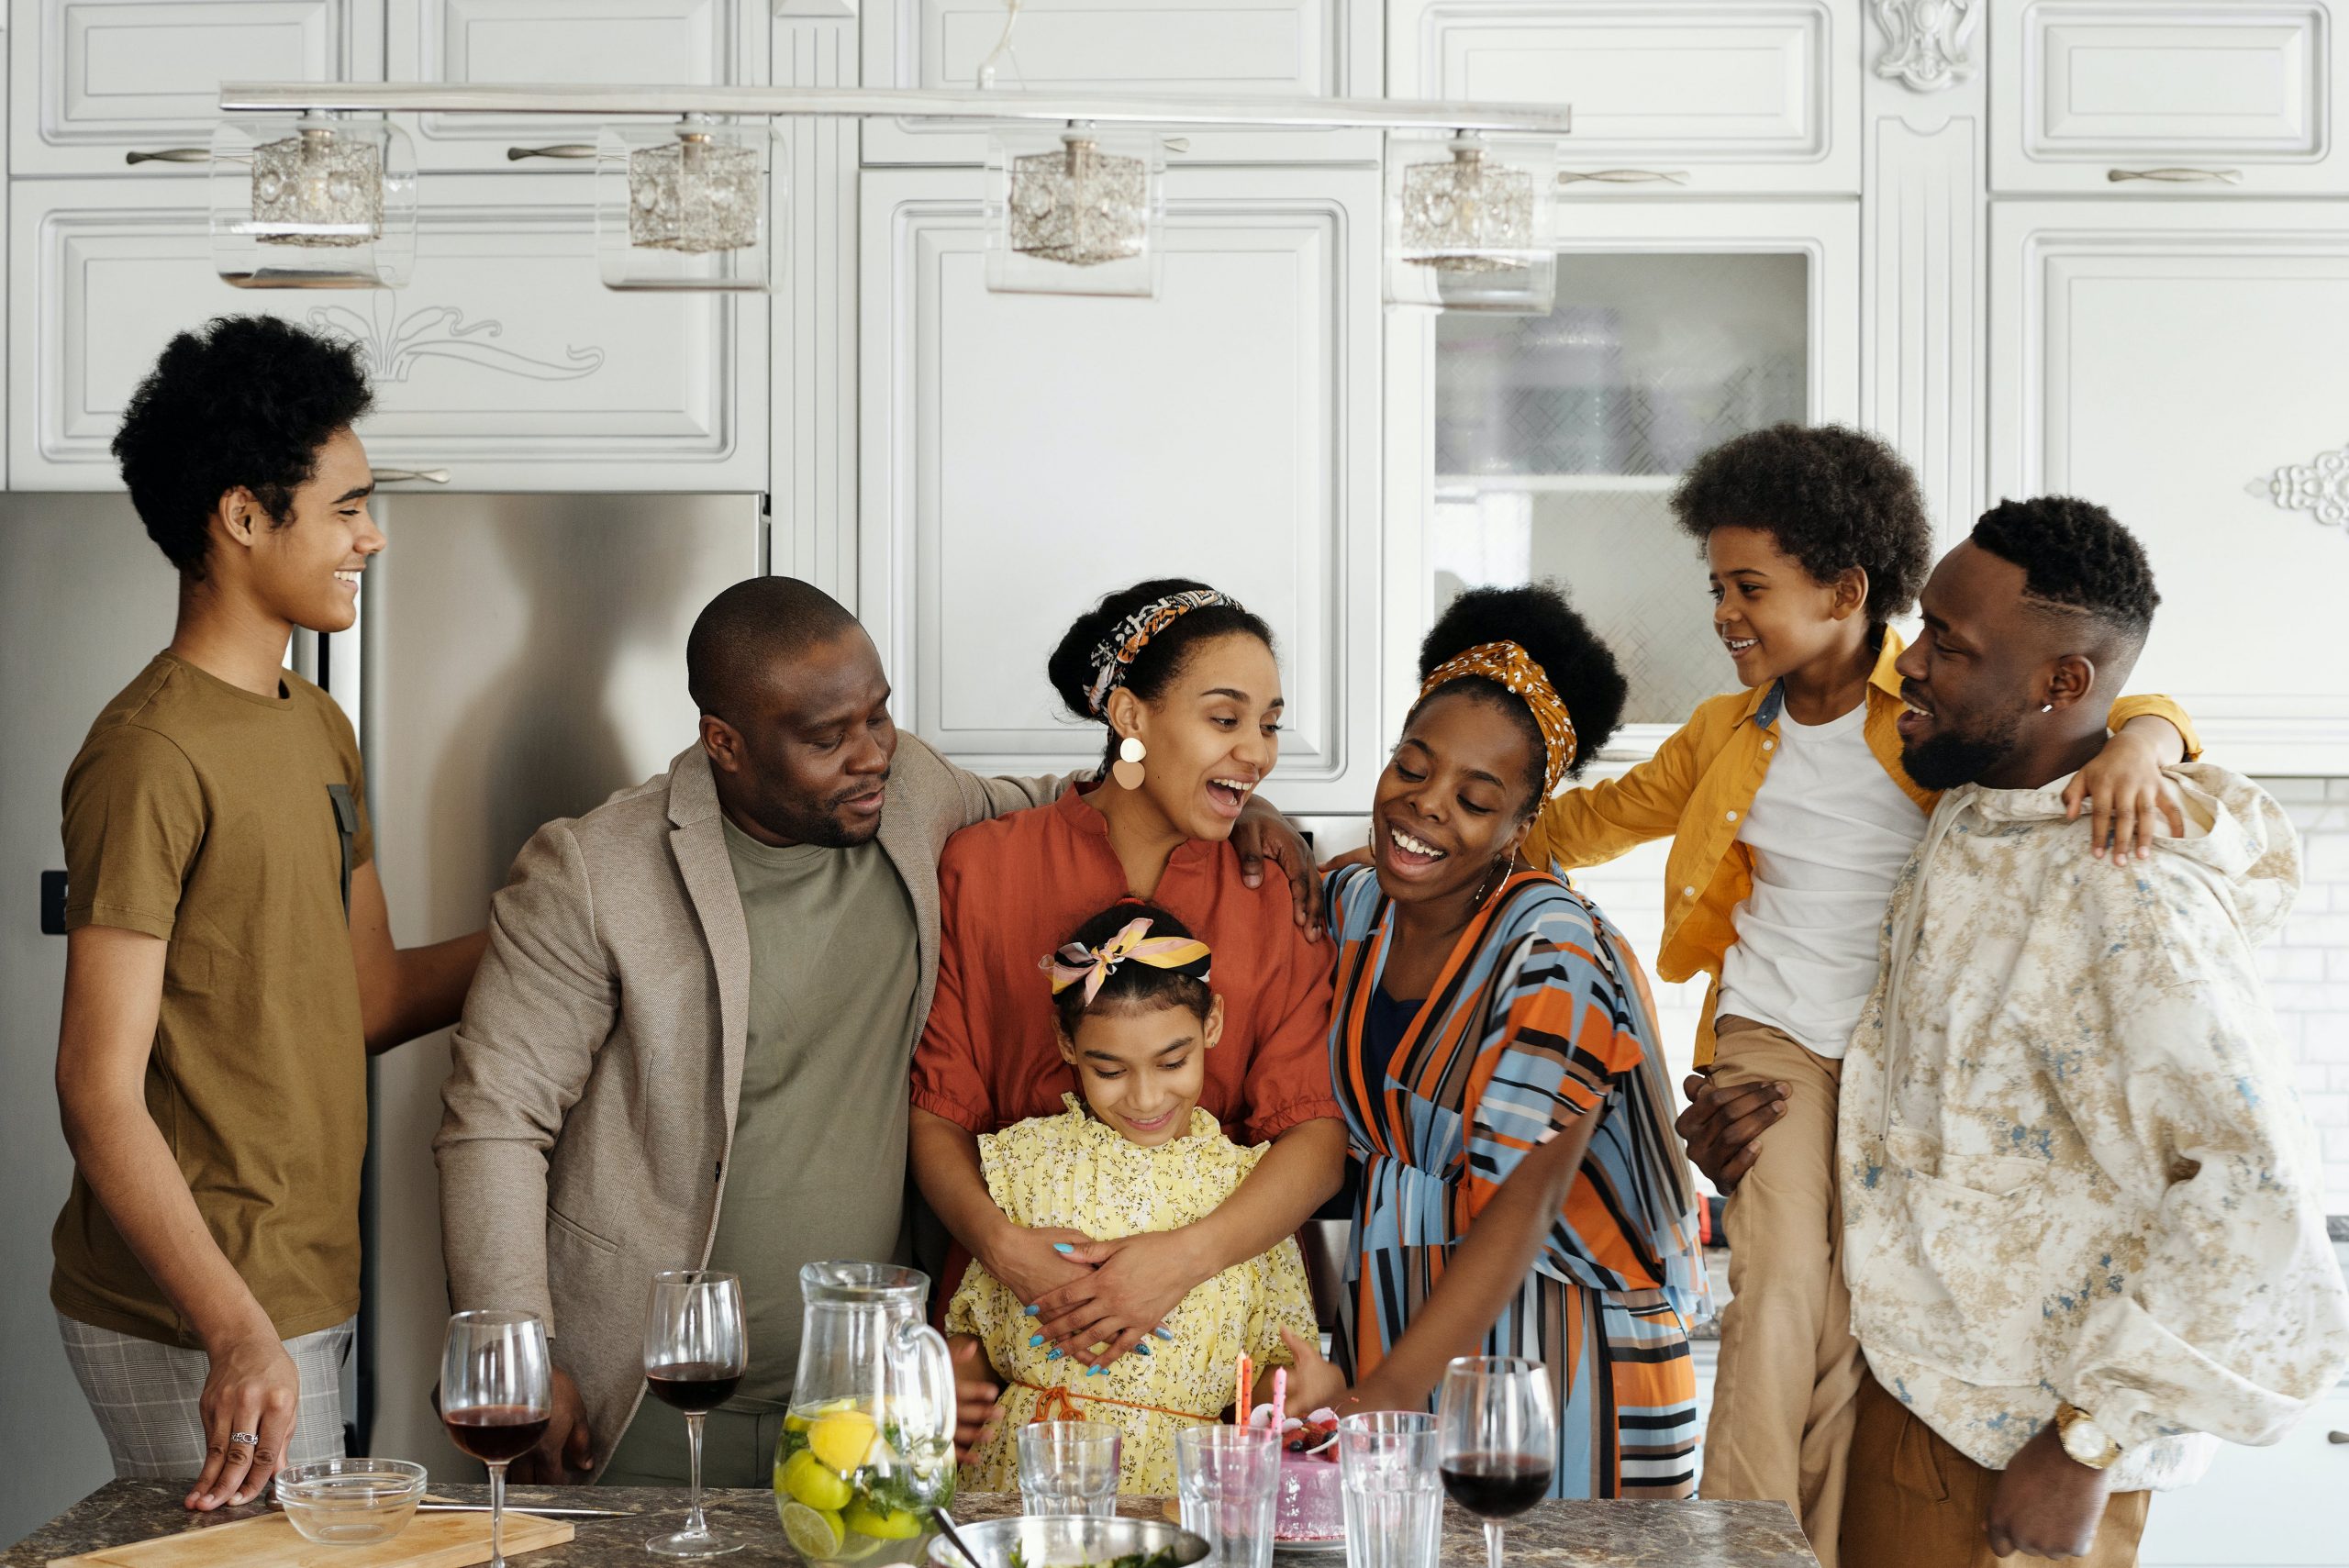 A joyful multi-generational family gathered together in a cozy kitchen, smiling and embracing. 